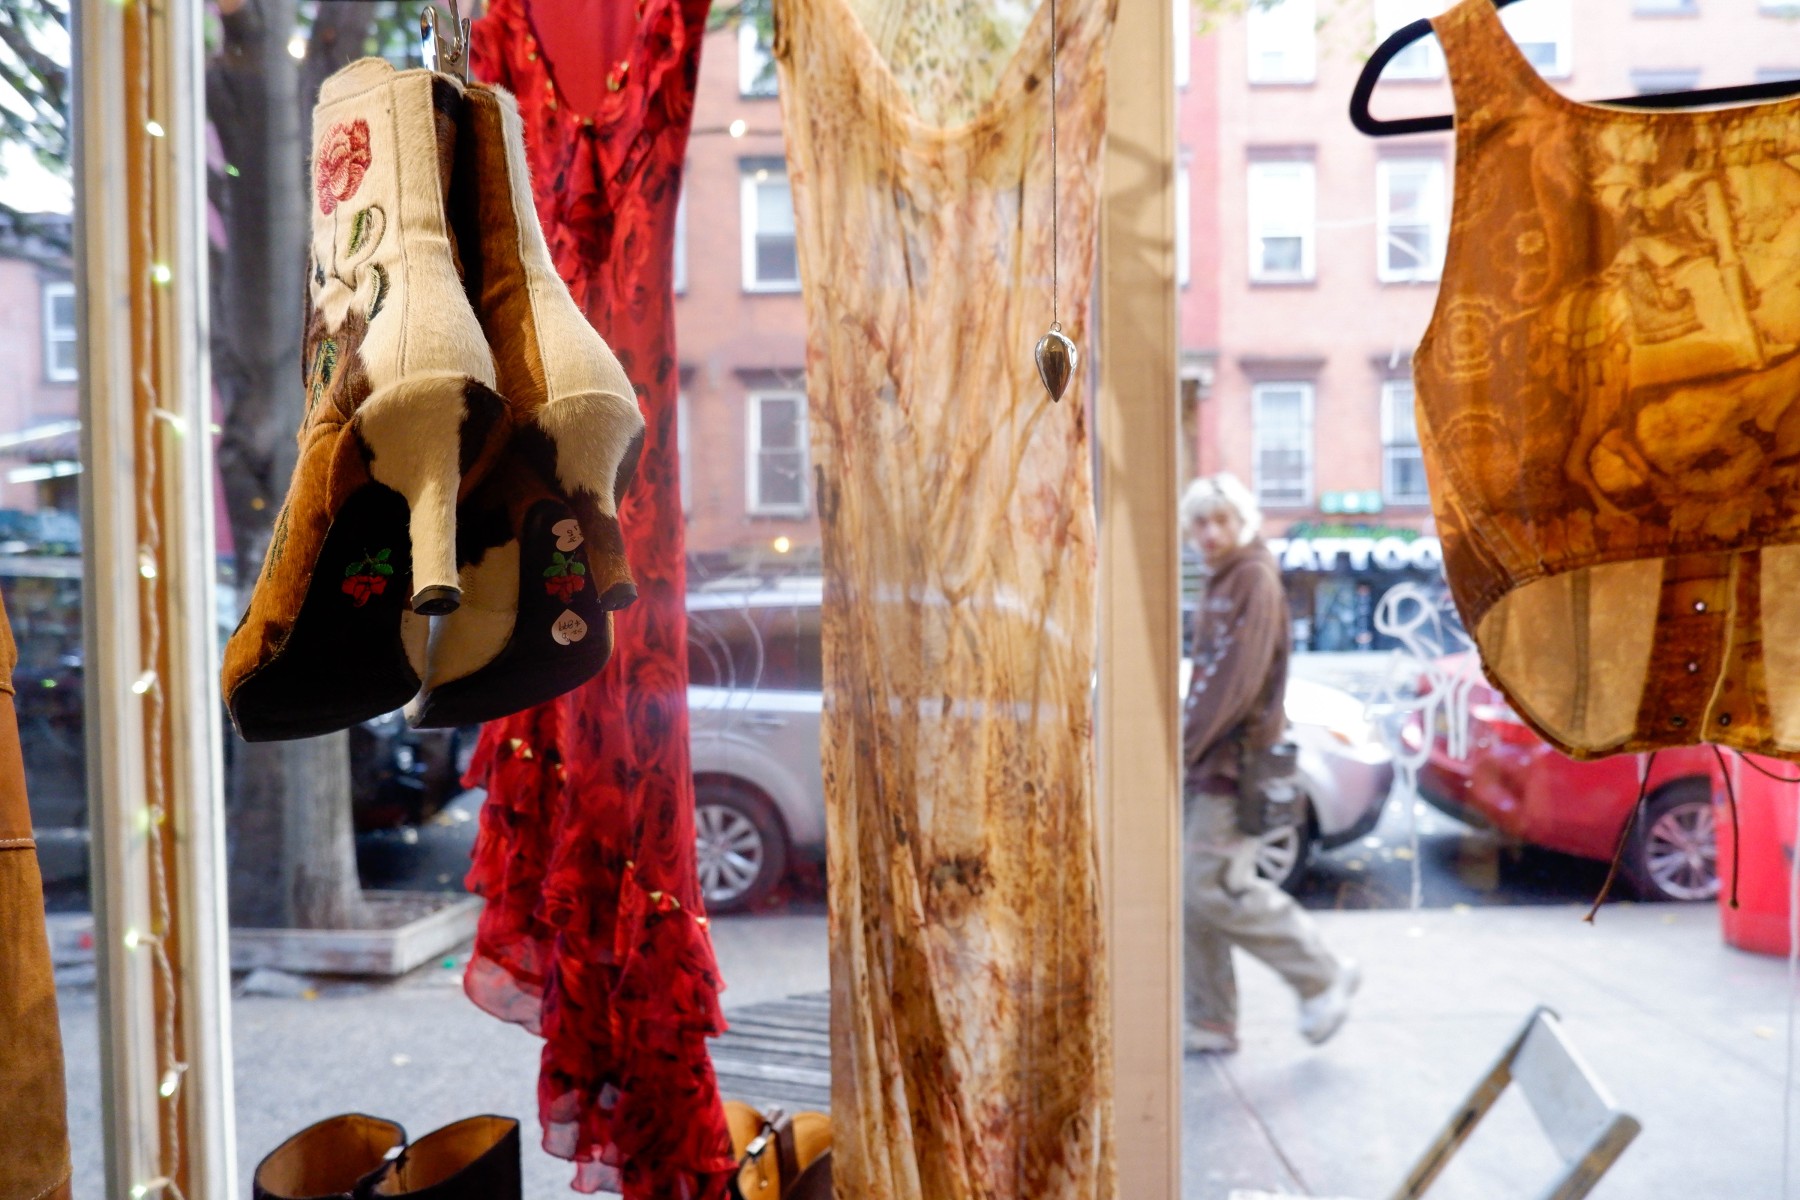 Two windows are filled with unique vintage – not thrift – pieces, inviting passersby to slow down and stroll through.